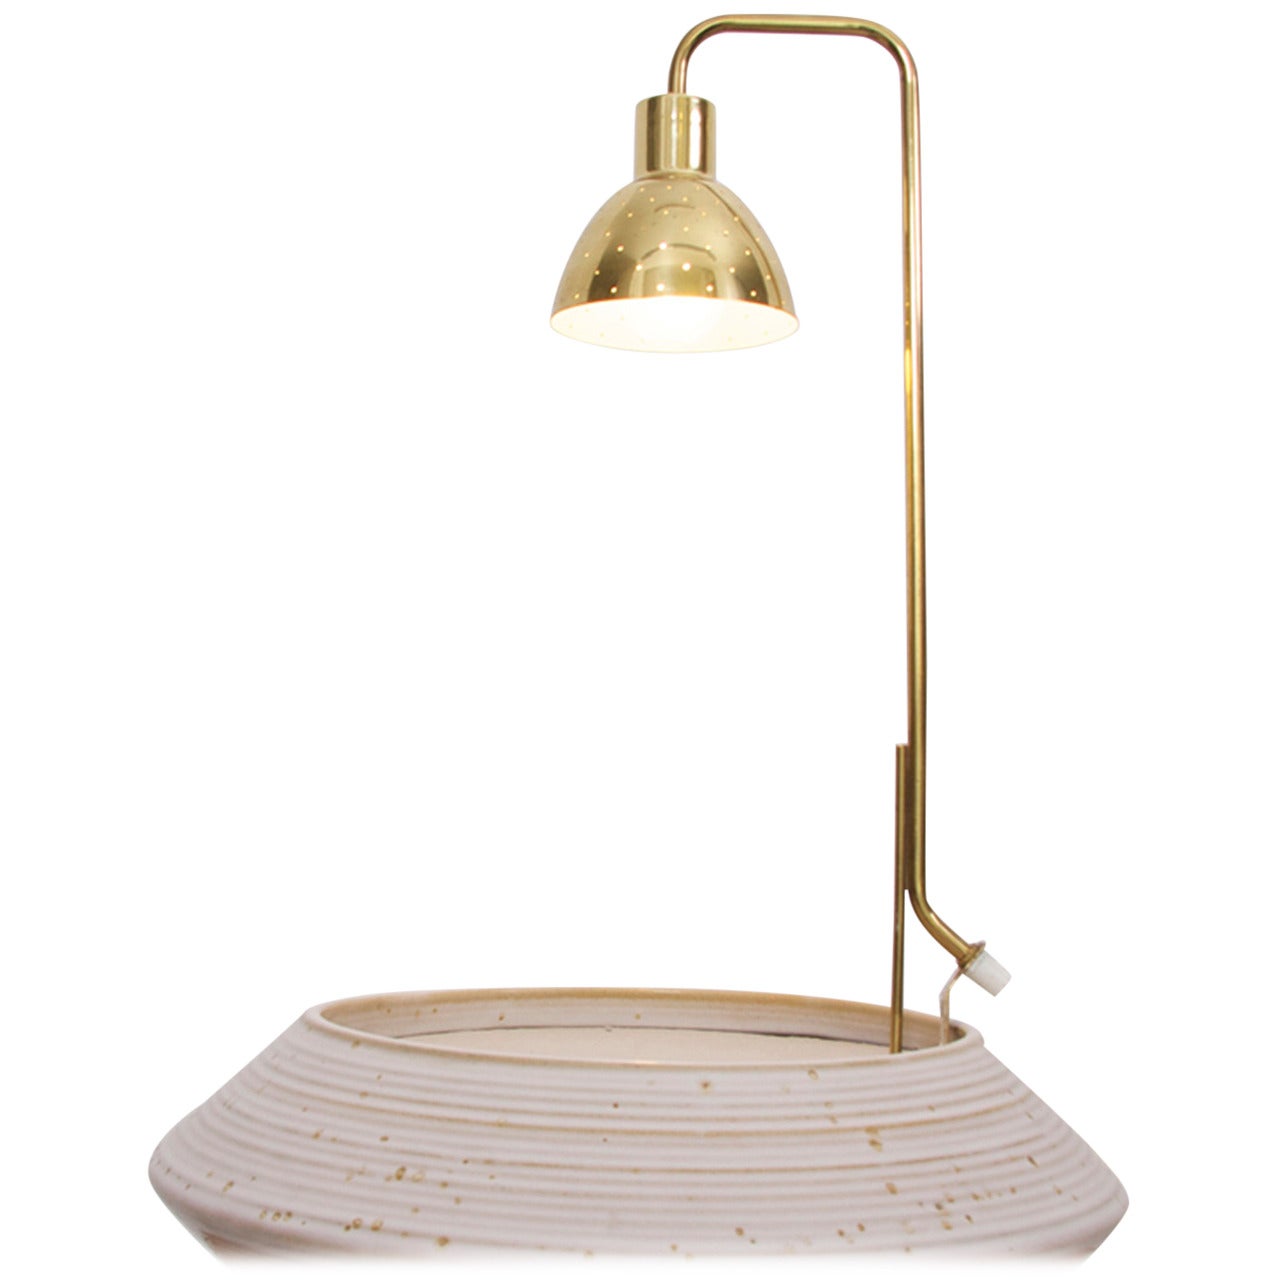 Planter lamp for Markaryd by Swedish designer Hans Agne Jakobsson to stick down on flower pot.
To be on the the safe side, the lamp should be checked locally by a specialist concerning local requirements.

 